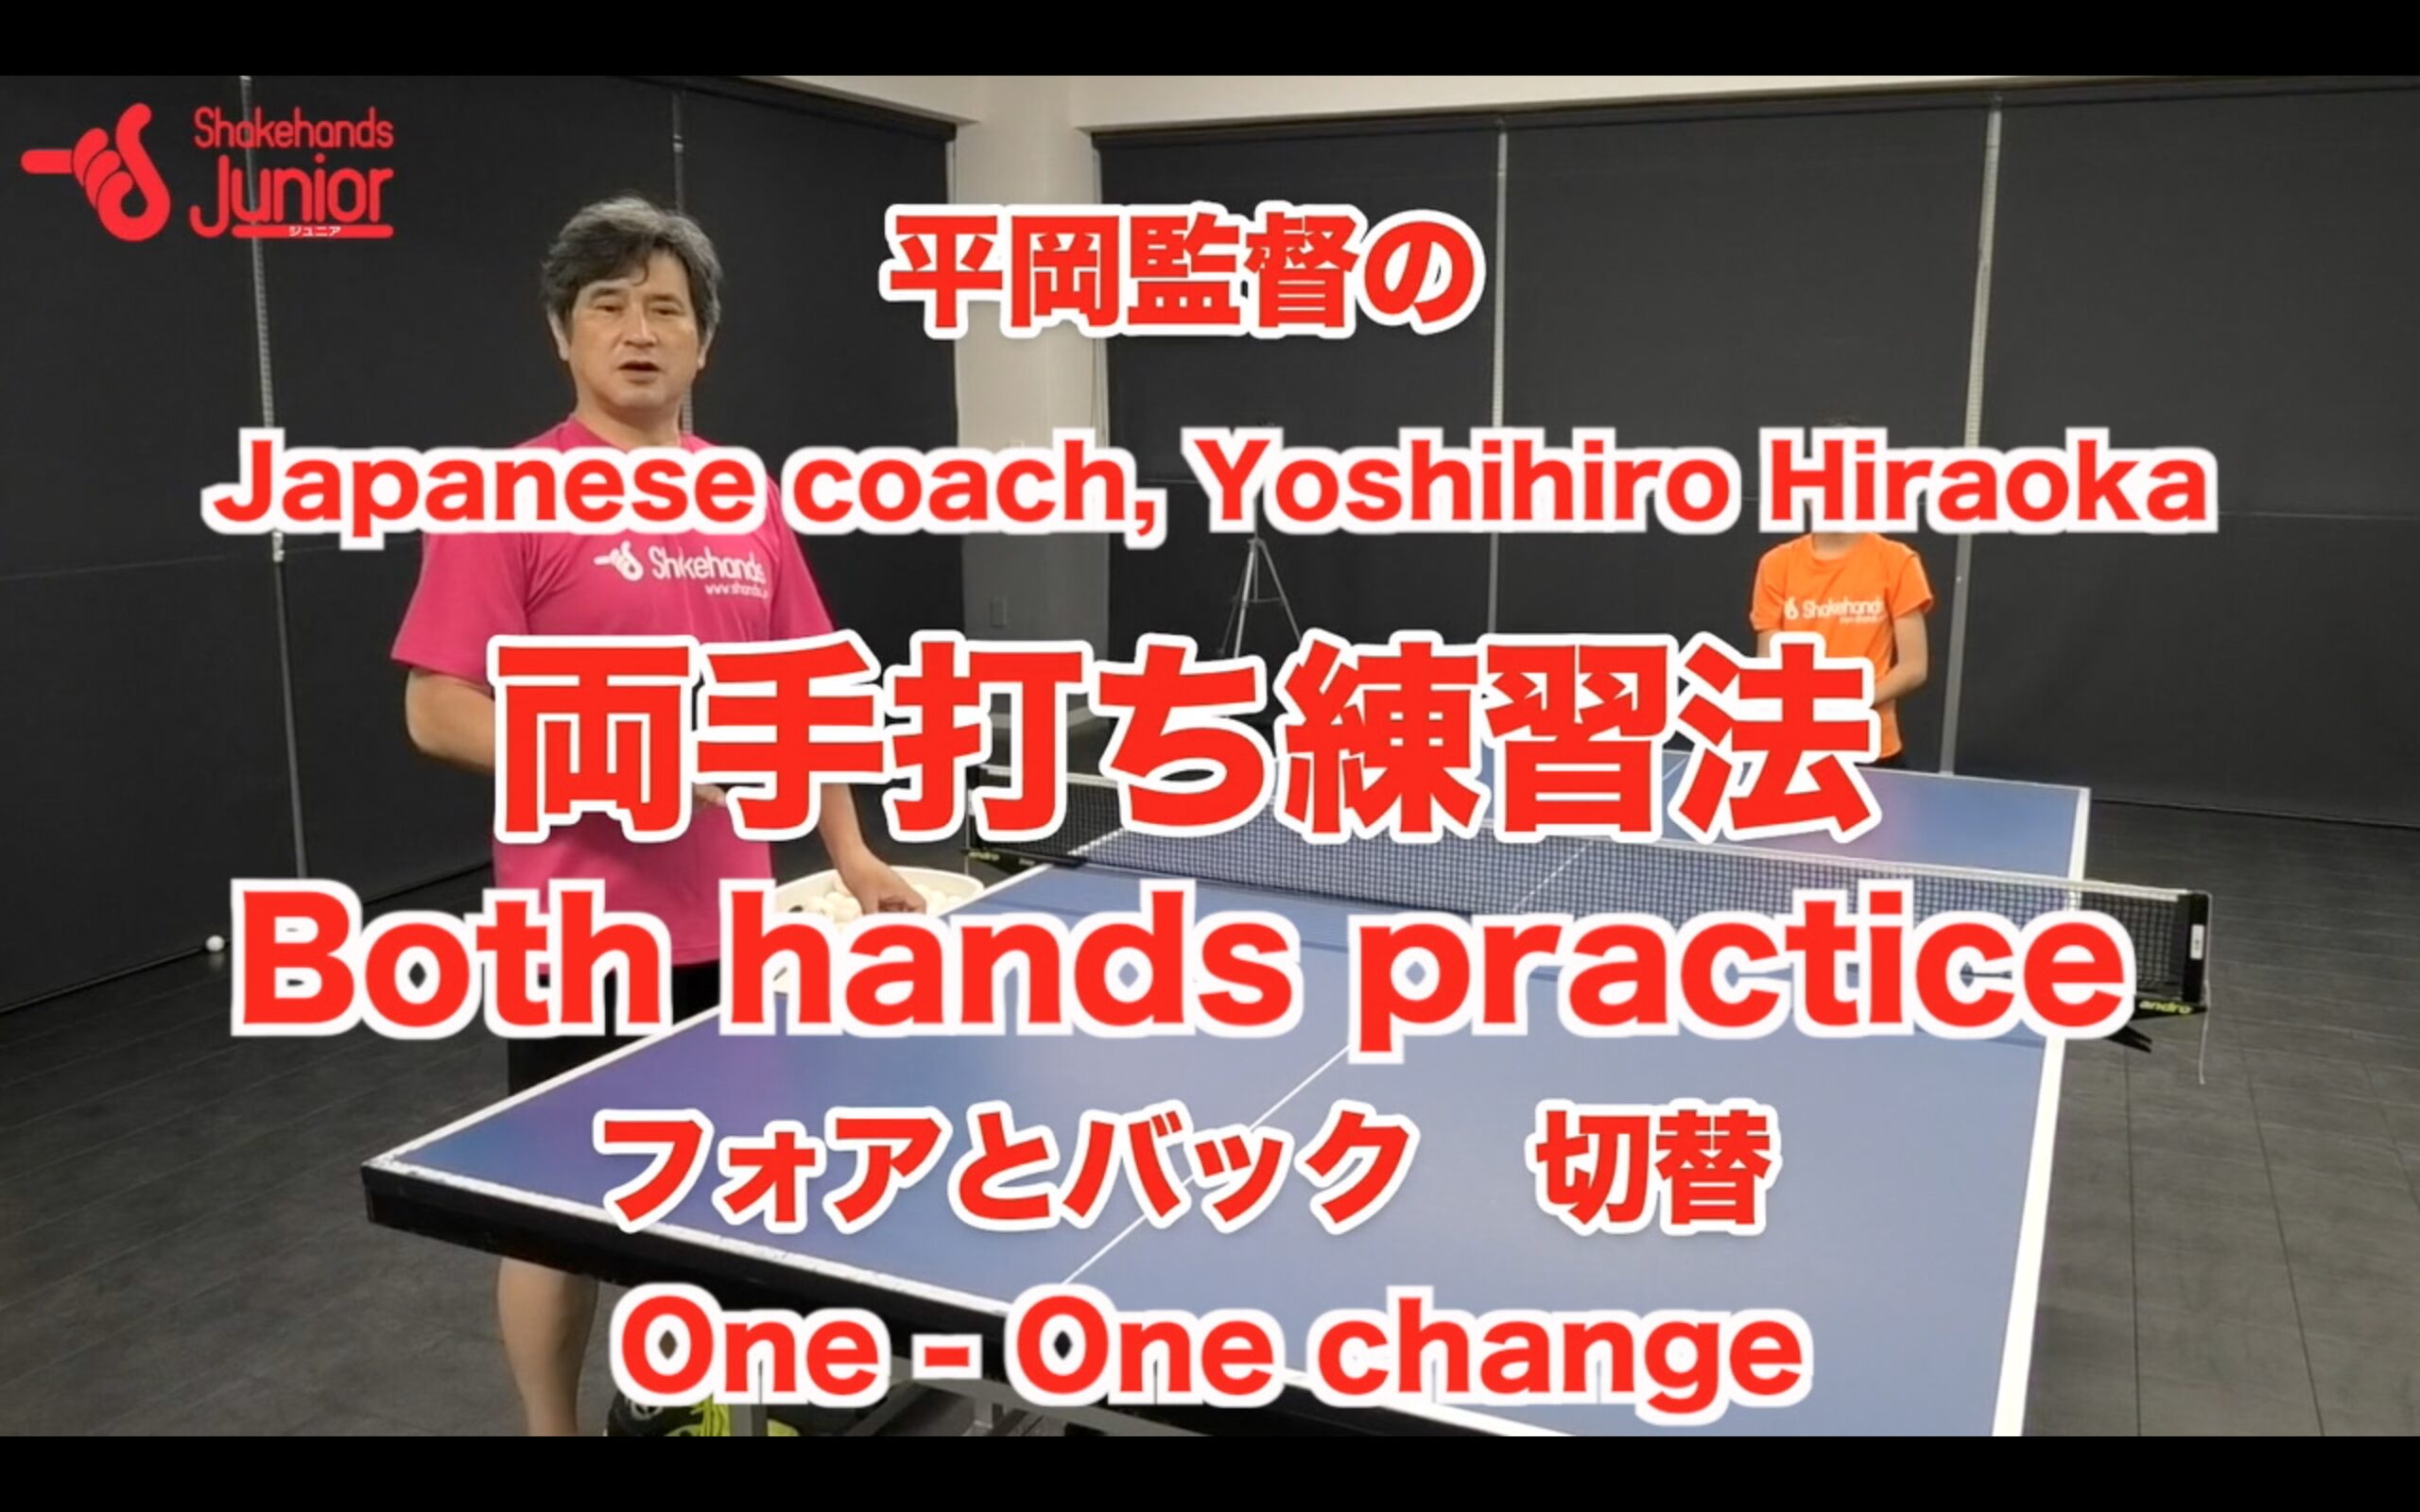 Both hands practice one one change